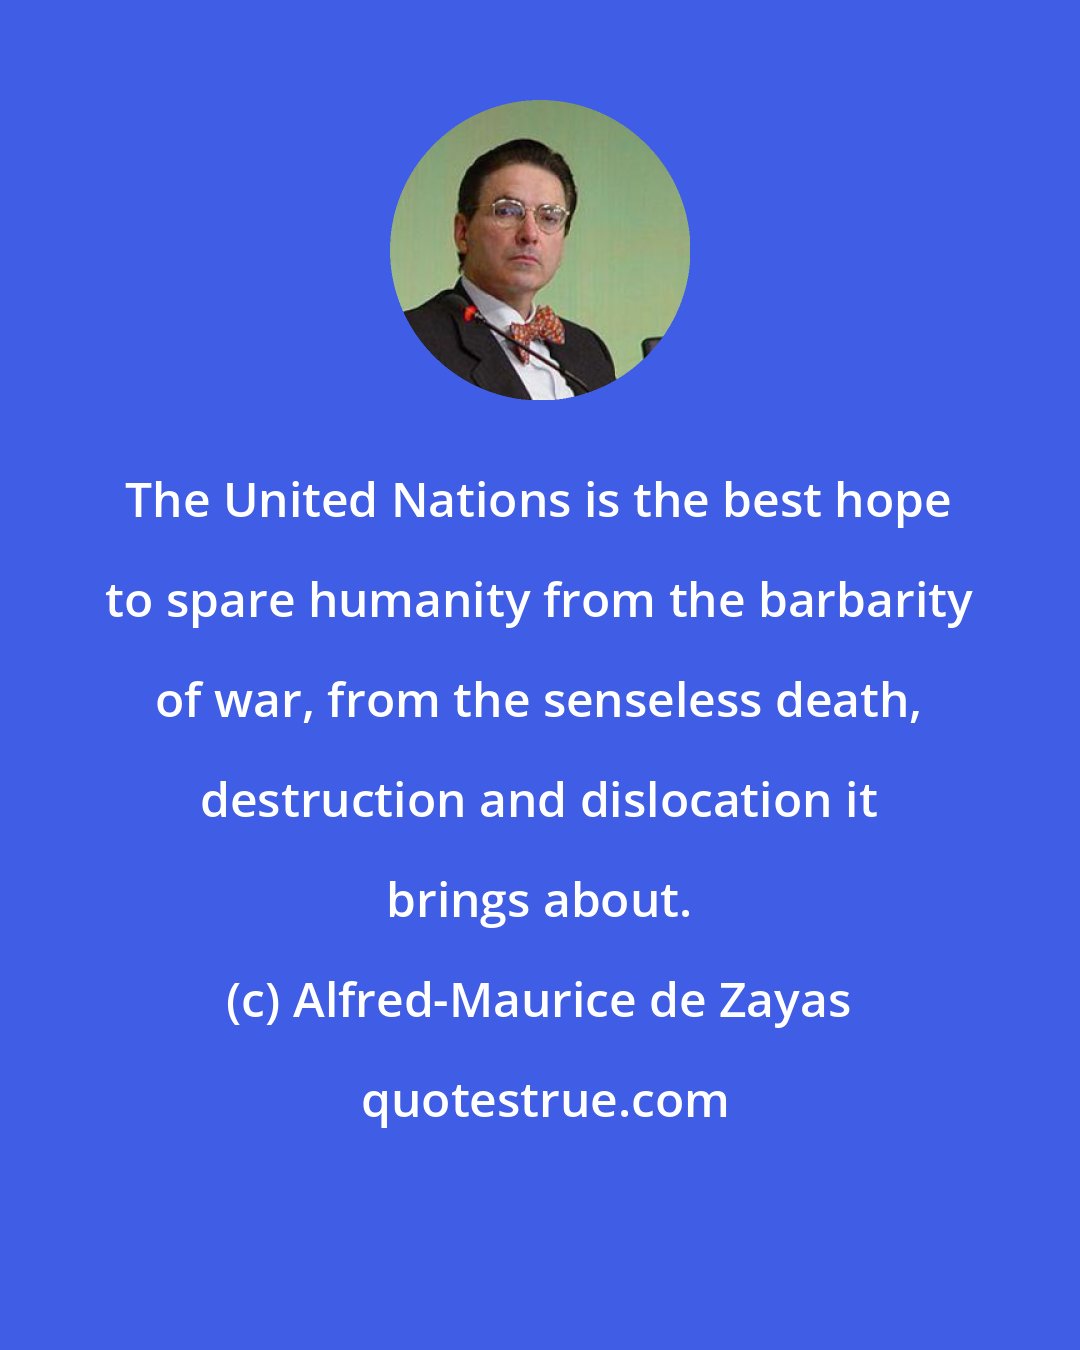 Alfred-Maurice de Zayas: The United Nations is the best hope to spare humanity from the barbarity of war, from the senseless death, destruction and dislocation it brings about.